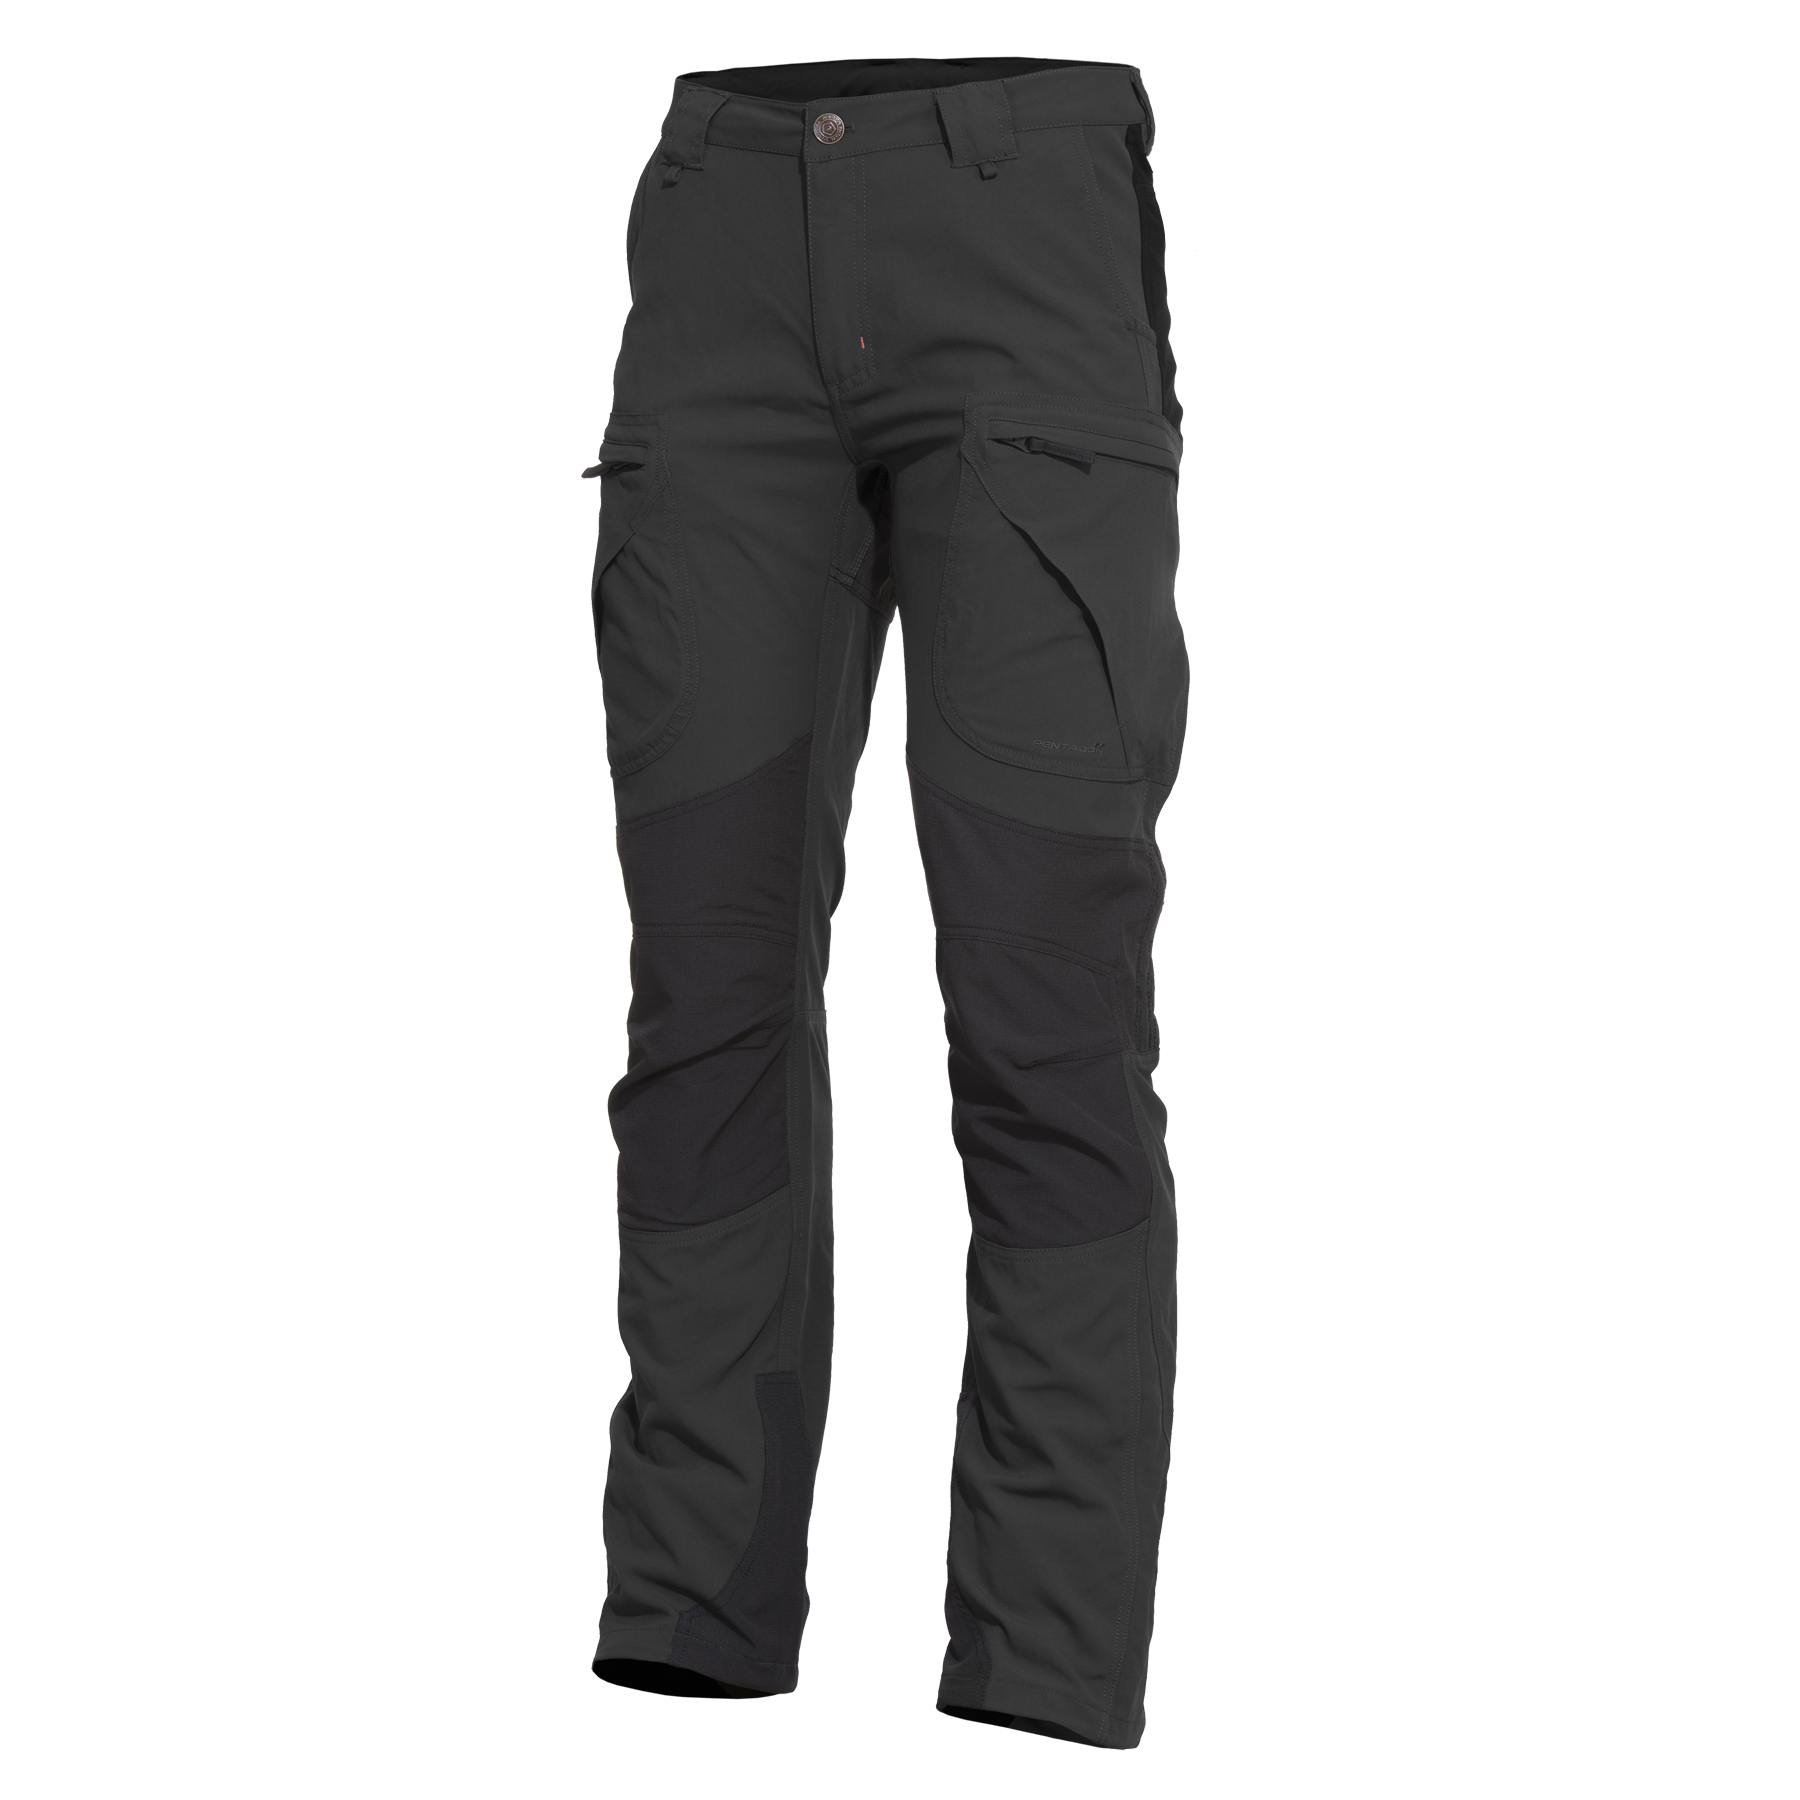 Pentagon Vorras Climbing Pants Expedition Walking Outdoor Hiking Trousers Coyote 